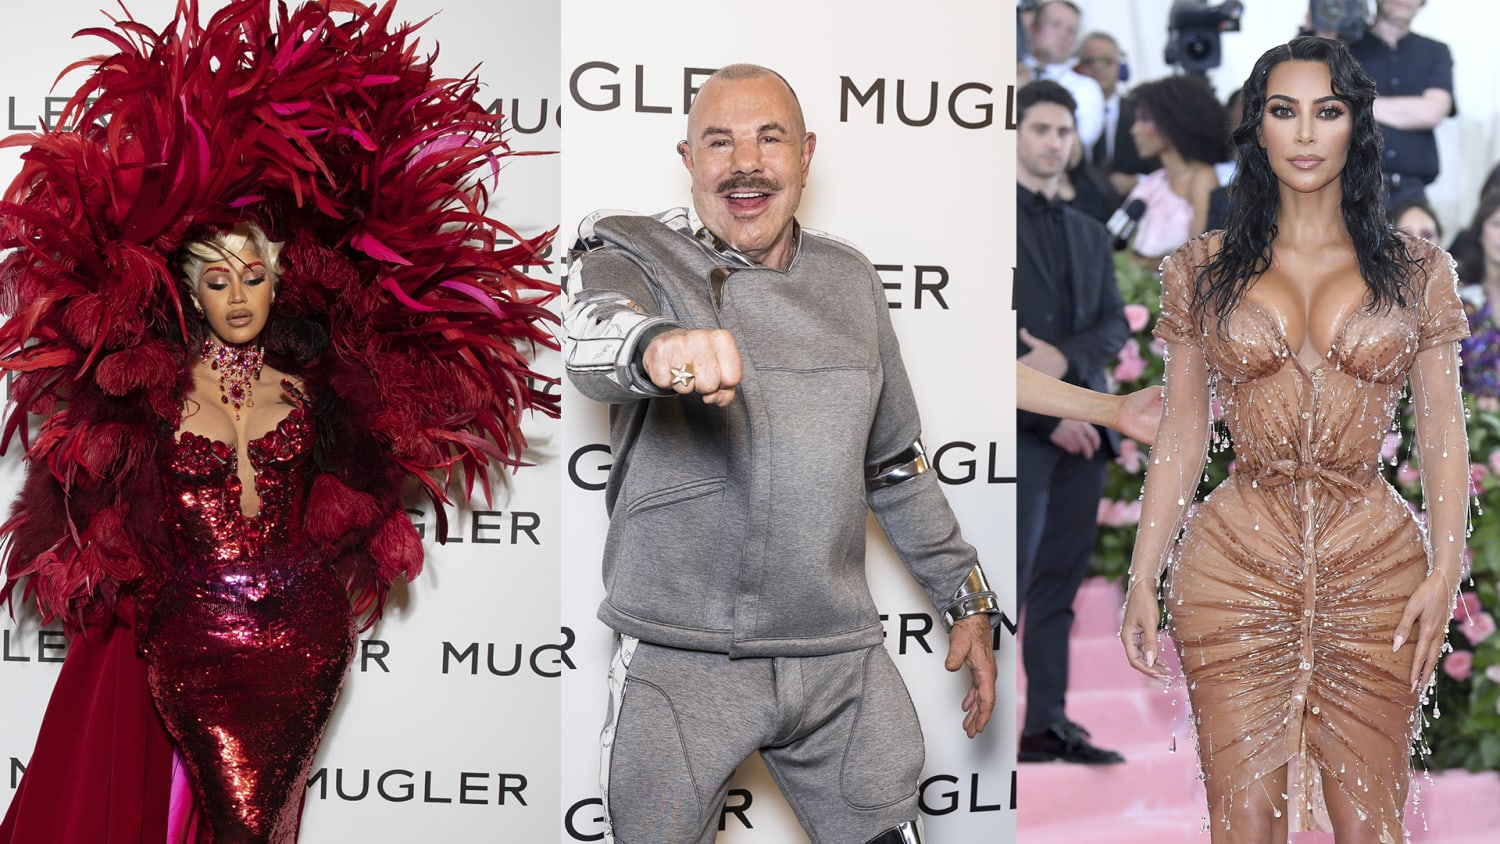 Cardi B Calls Thierry Mugler 'a True Inspiration' In Moving